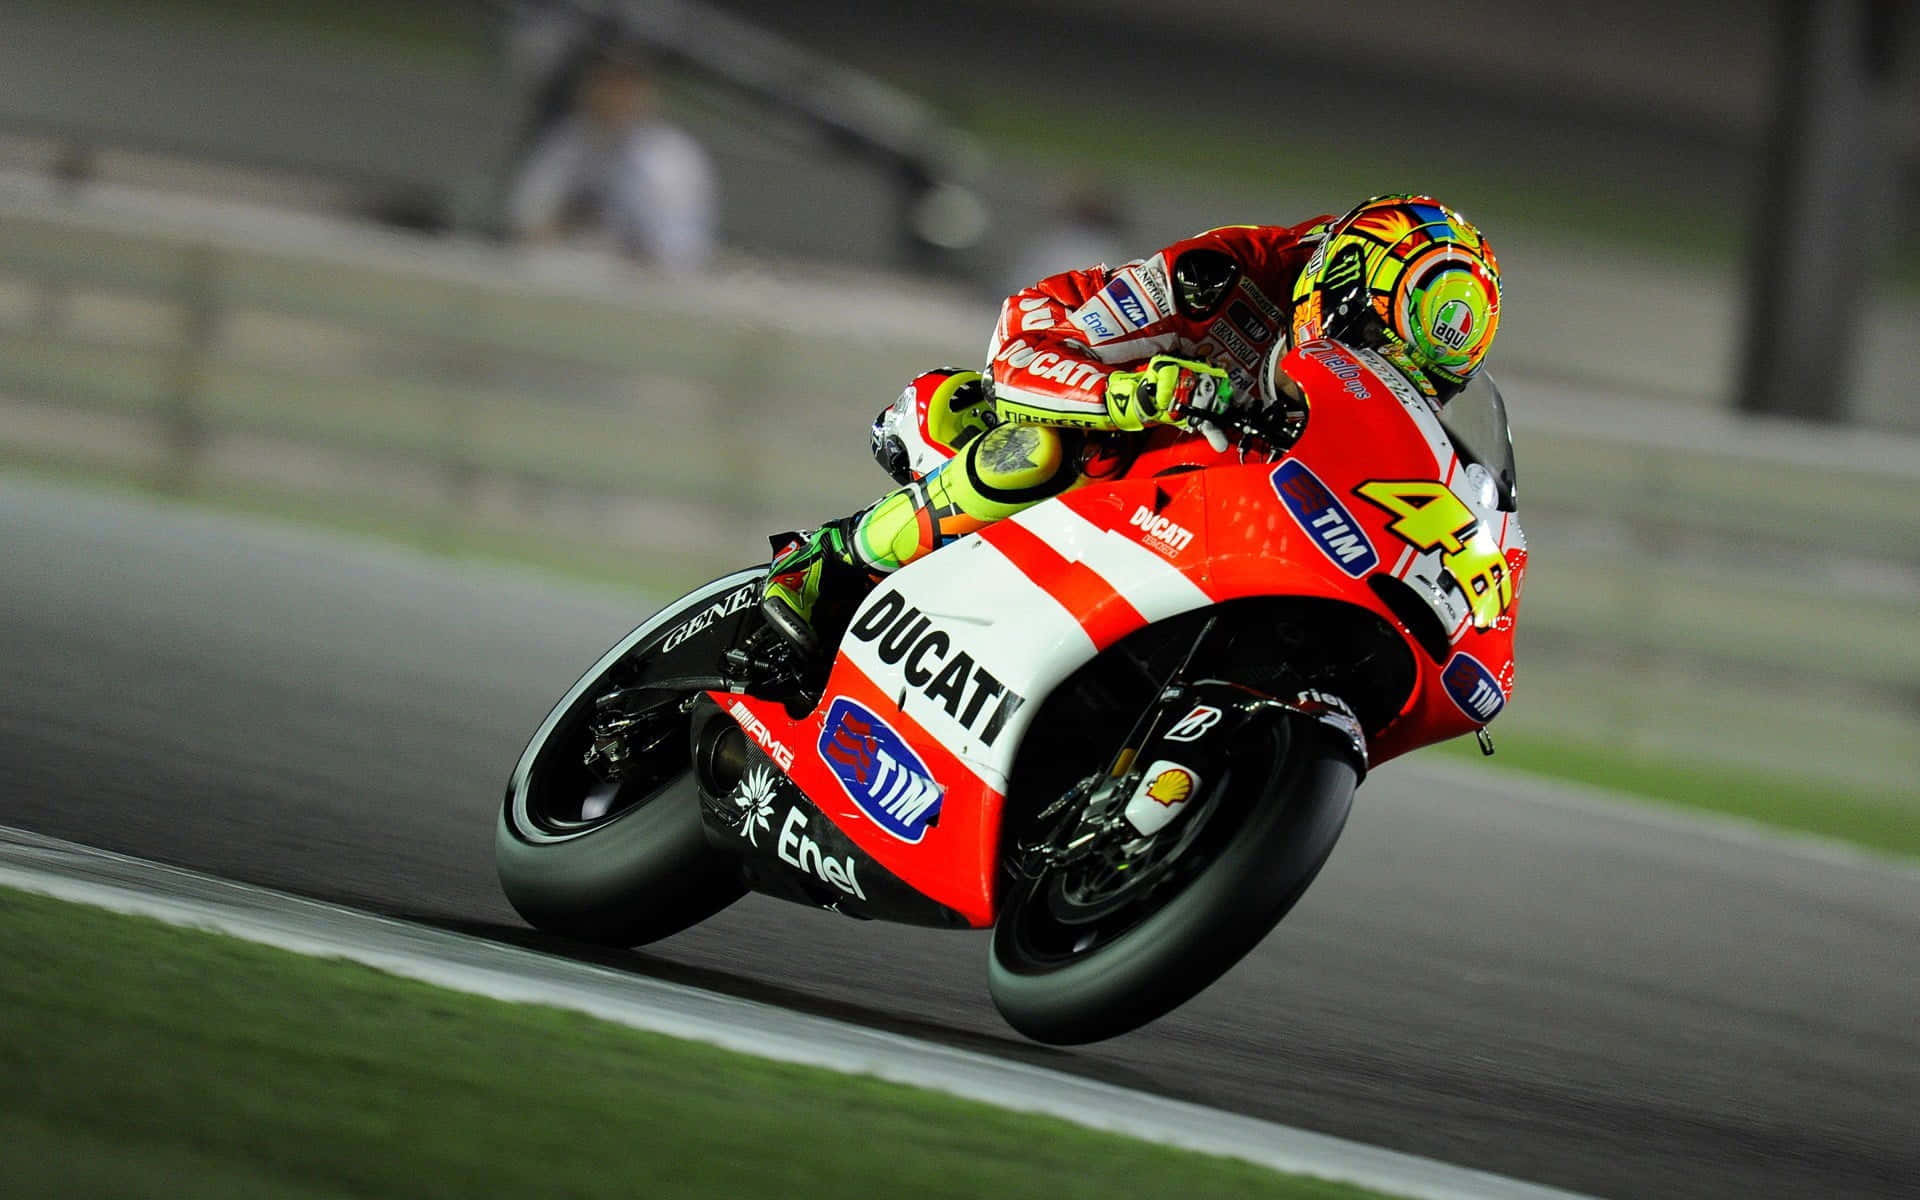 High-speed Action With Vr46 At Qatar Motogp Test Drive